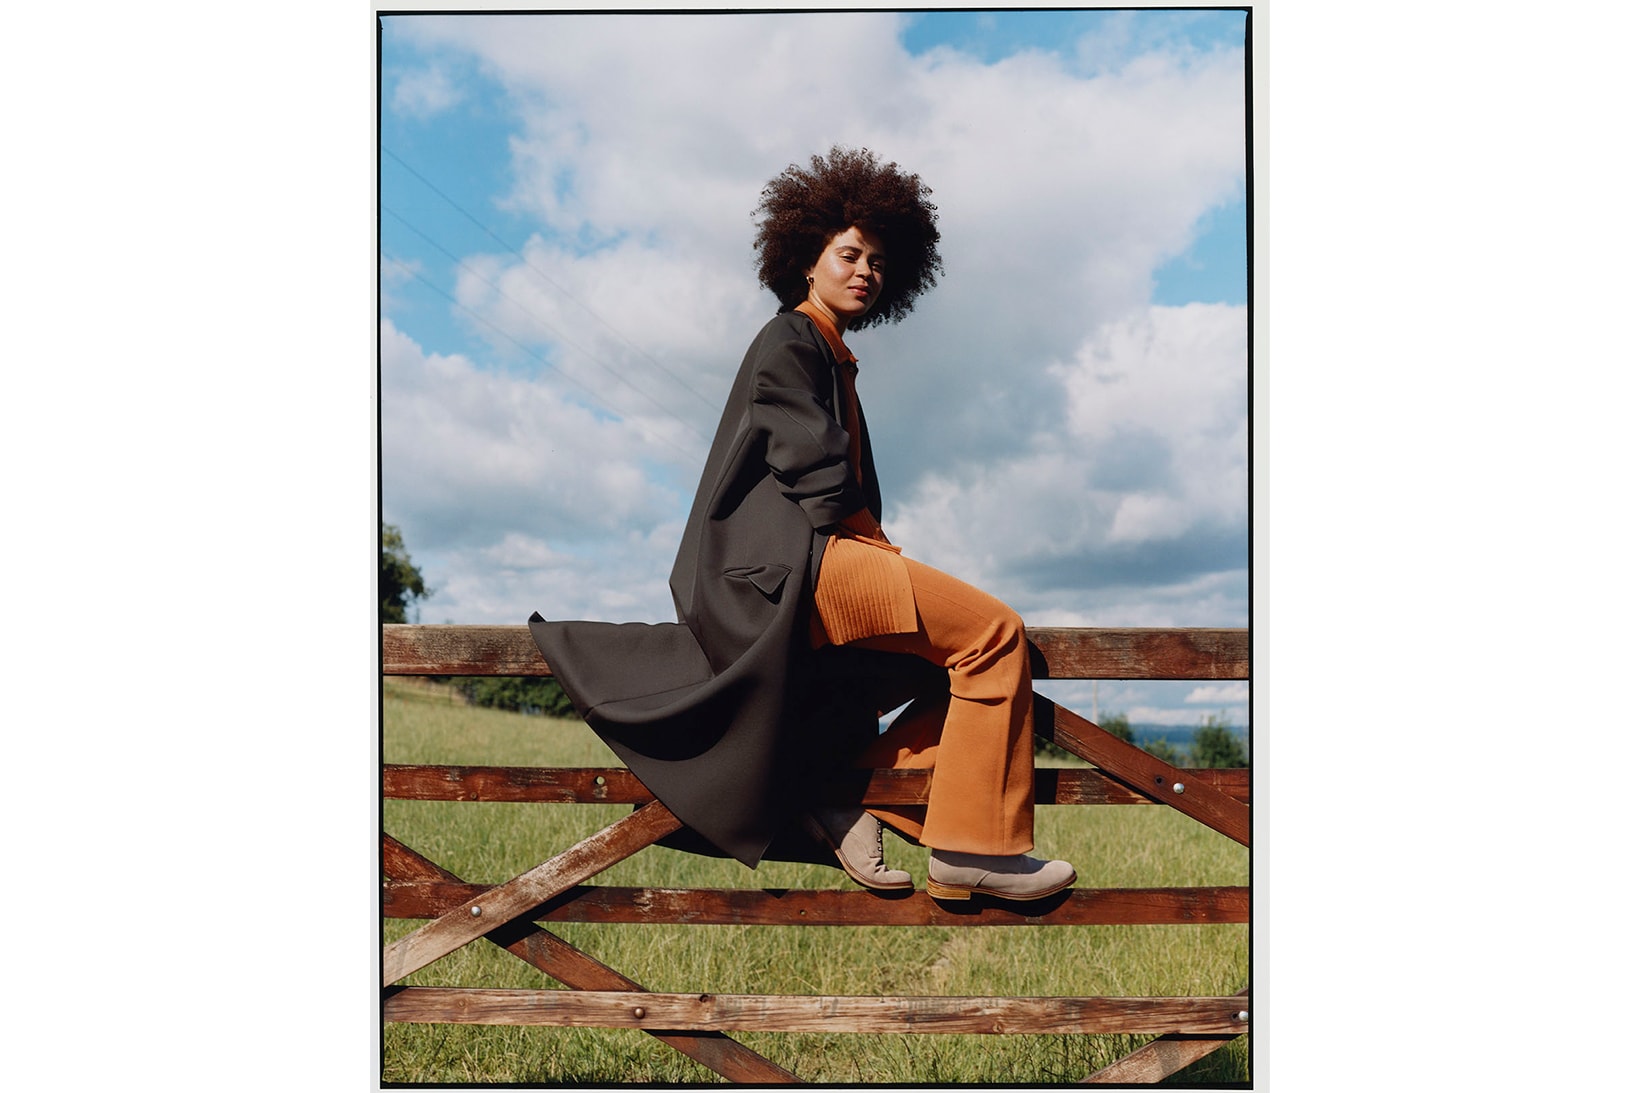 clarks fall winter campaign then now always desert boot somerset england